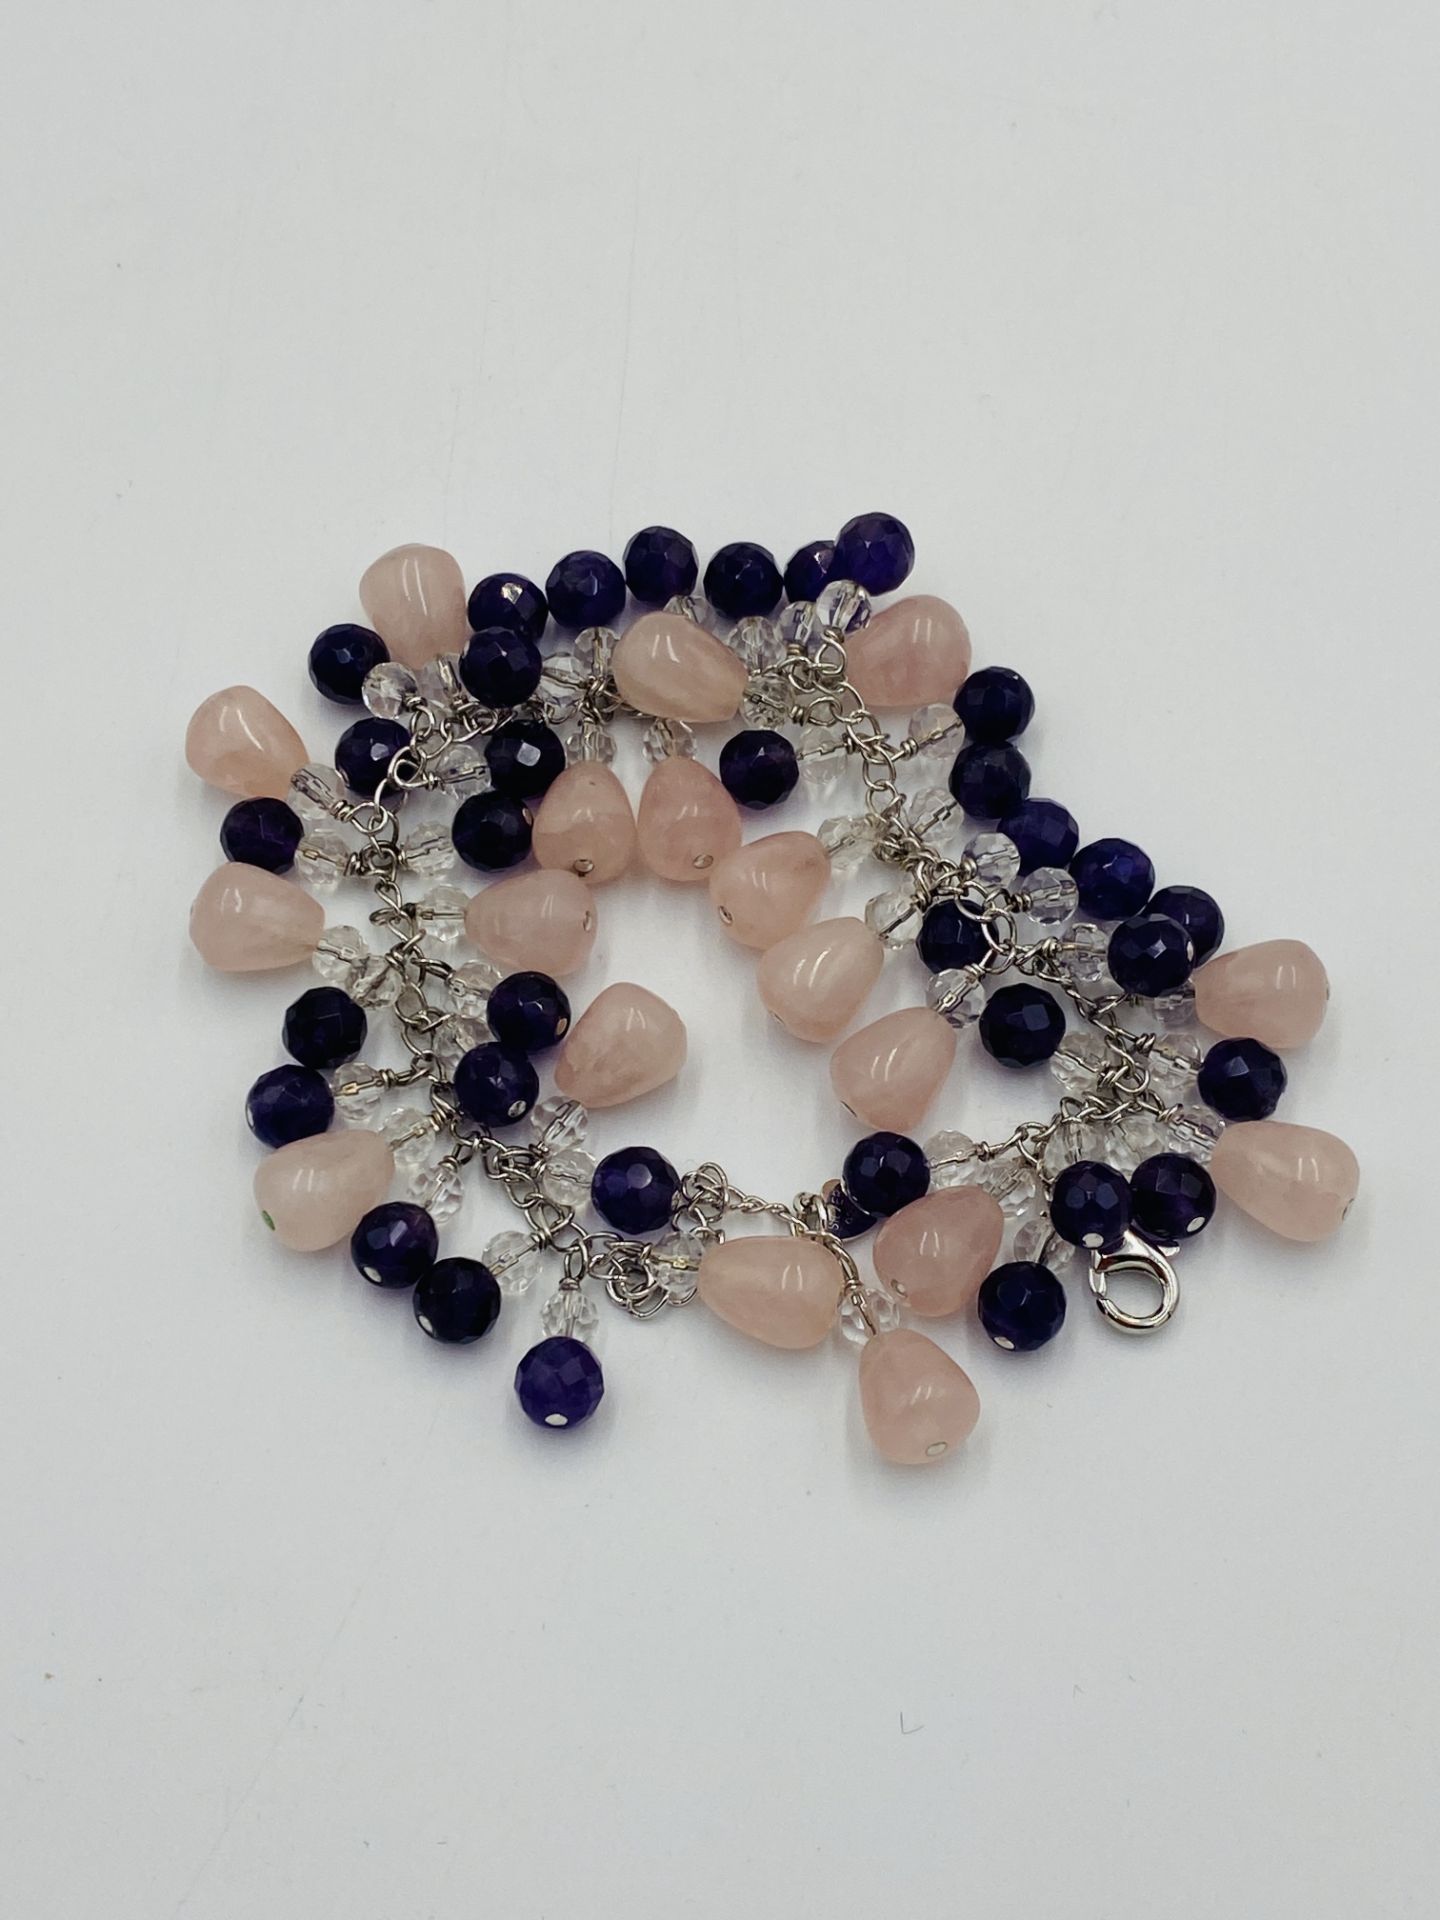 Silver bracelet with amethyst and rose quartz - Image 4 of 4